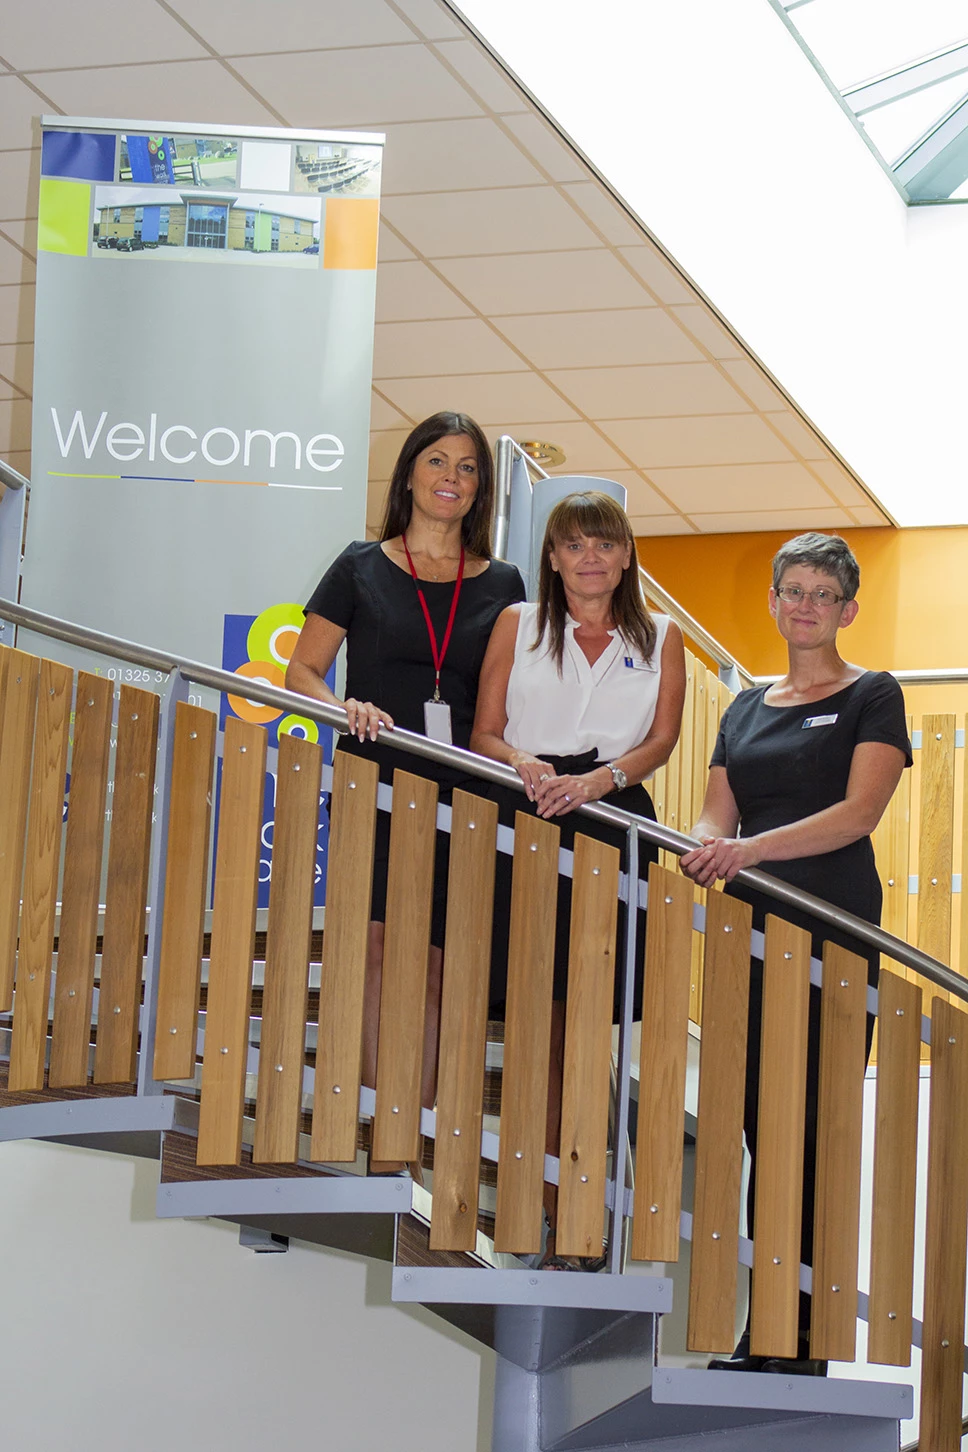 (L-R) Angela Wilkinson (Business Manager), Tracy Henderson (Centre Administrator), Julie Turnbull (Centre Administrator)